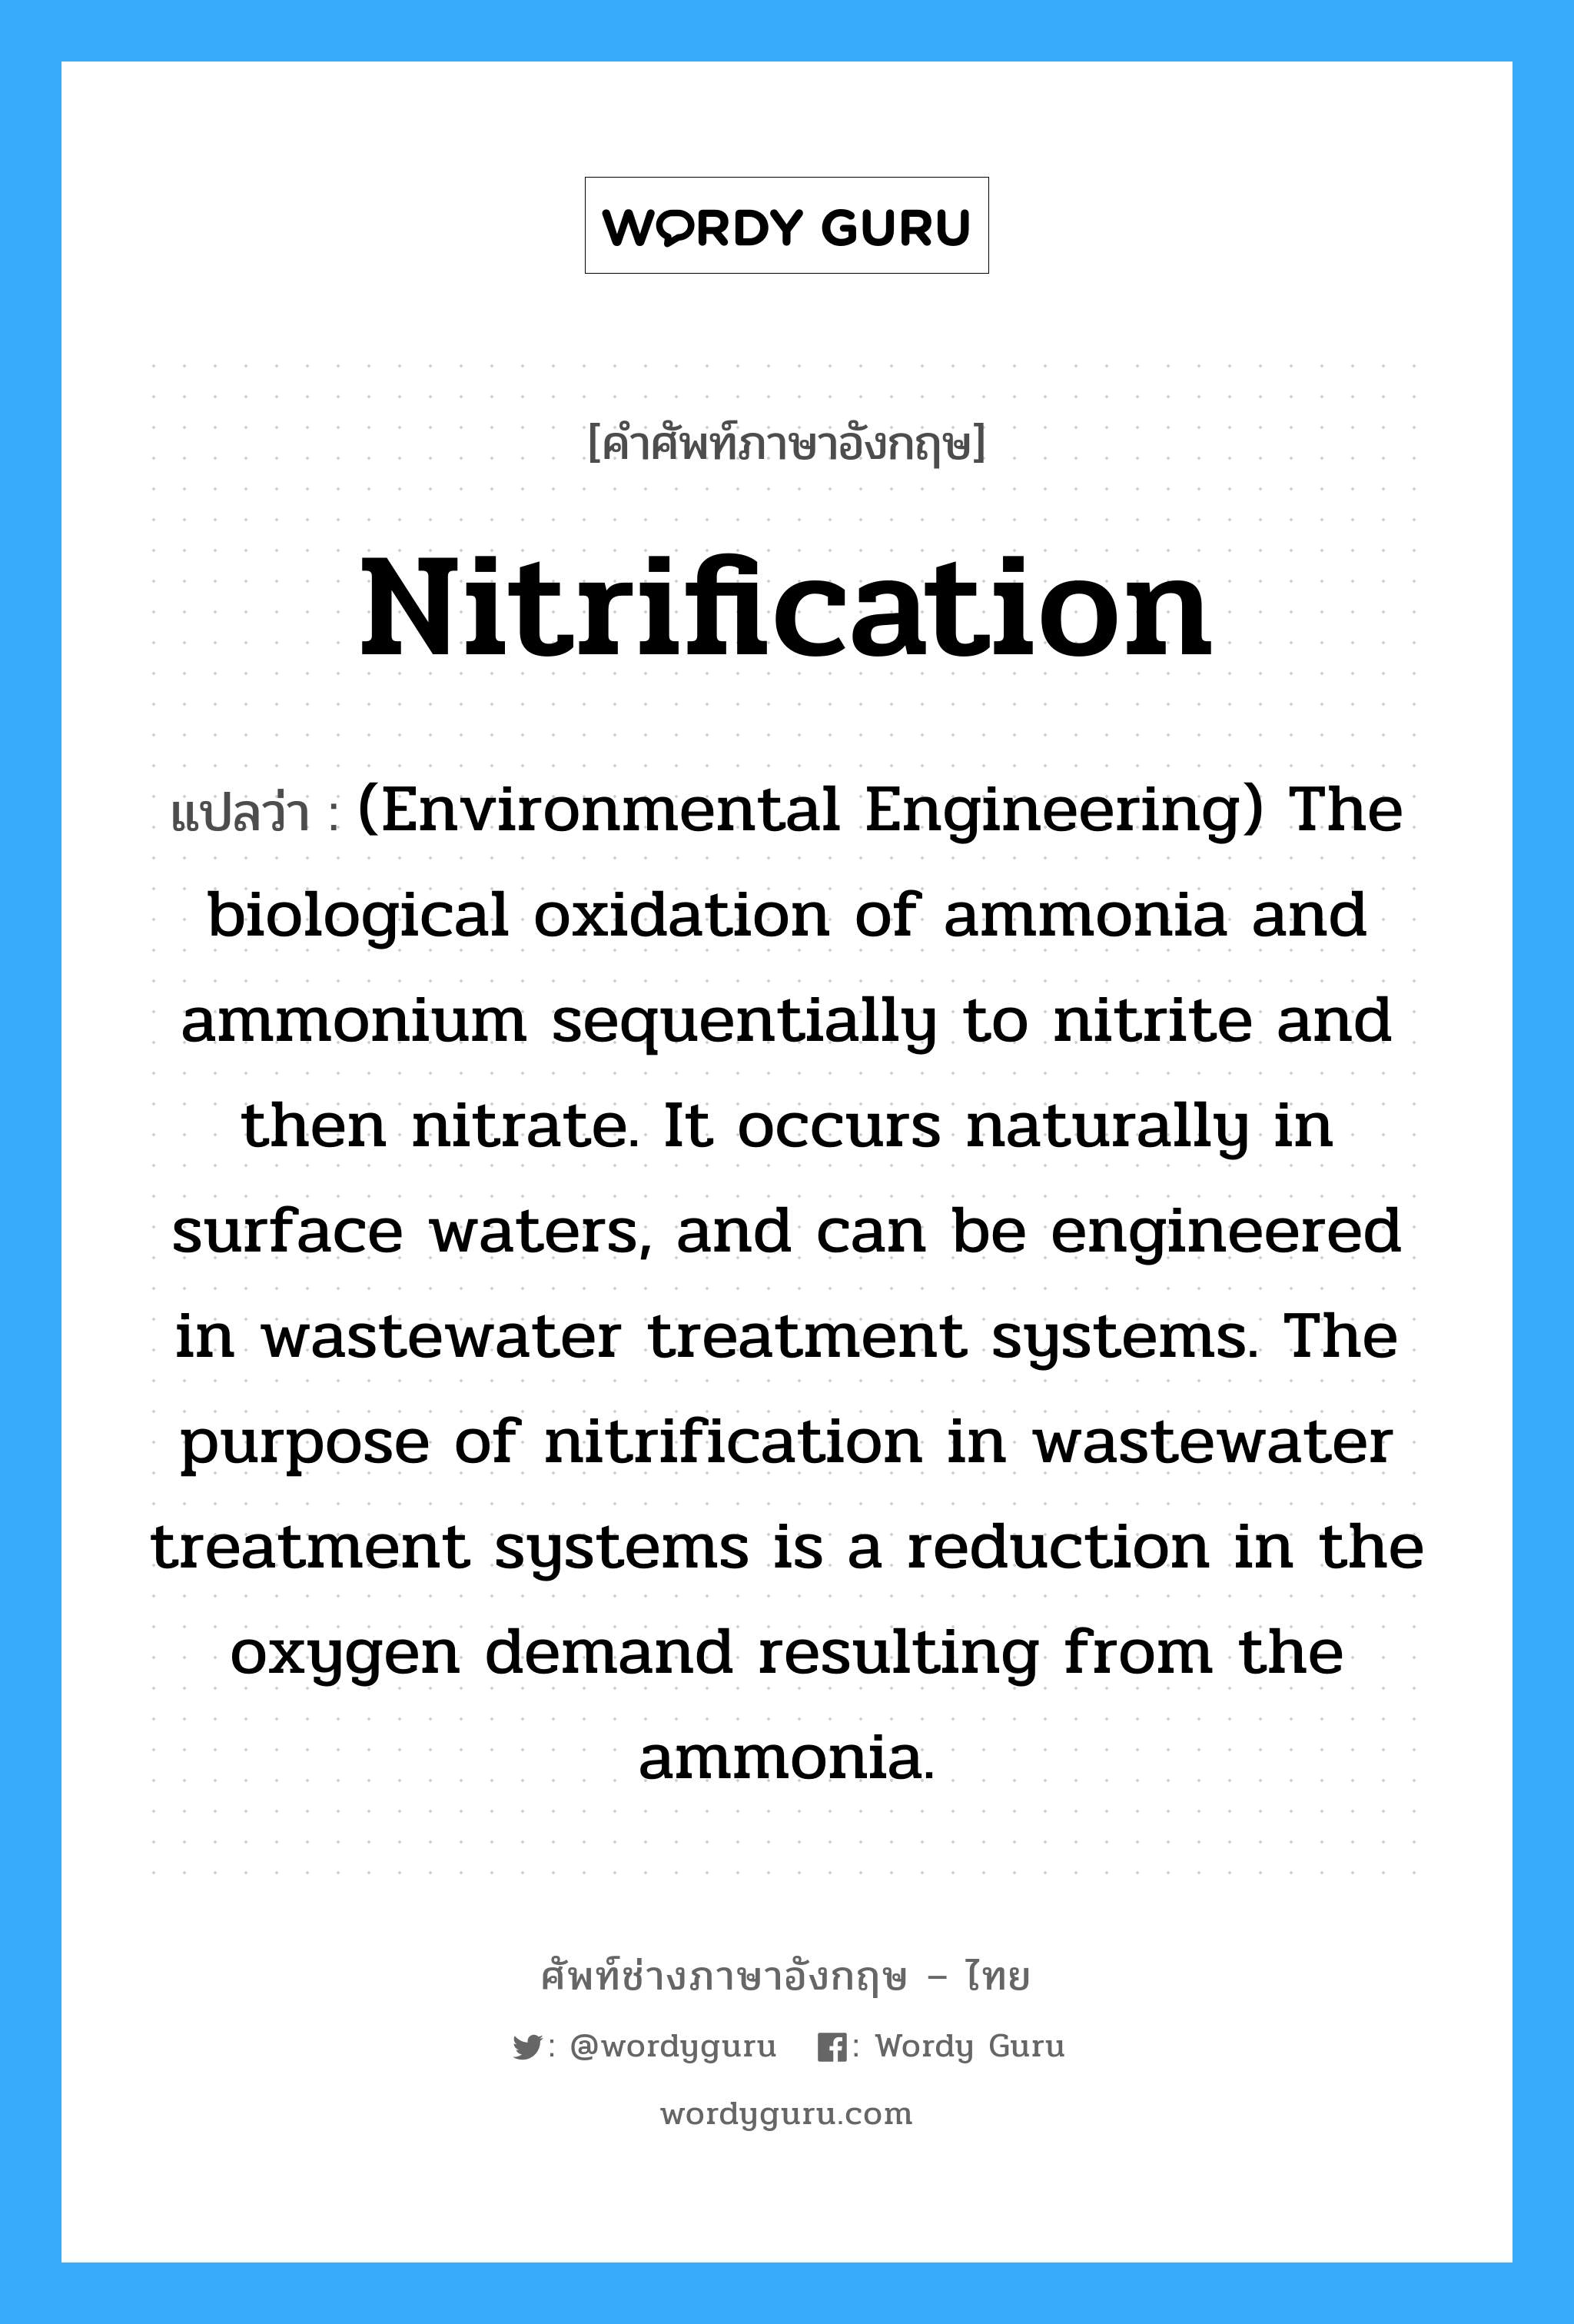 (Environmental Engineering) The biological oxidation of ammonia and ammonium sequentially to nitrite and then nitrate. It occurs naturally in surface waters, and can be engineered in wastewater treatment systems. The purpose of nitrification in wastewater treatment systems is a reduction in the oxygen demand resulting from the ammonia. ภาษาอังกฤษ?, คำศัพท์ช่างภาษาอังกฤษ - ไทย (Environmental Engineering) The biological oxidation of ammonia and ammonium sequentially to nitrite and then nitrate. It occurs naturally in surface waters, and can be engineered in wastewater treatment systems. The purpose of nitrification in wastewater treatment systems is a reduction in the oxygen demand resulting from the ammonia. คำศัพท์ภาษาอังกฤษ (Environmental Engineering) The biological oxidation of ammonia and ammonium sequentially to nitrite and then nitrate. It occurs naturally in surface waters, and can be engineered in wastewater treatment systems. The purpose of nitrification in wastewater treatment systems is a reduction in the oxygen demand resulting from the ammonia. แปลว่า Nitrification